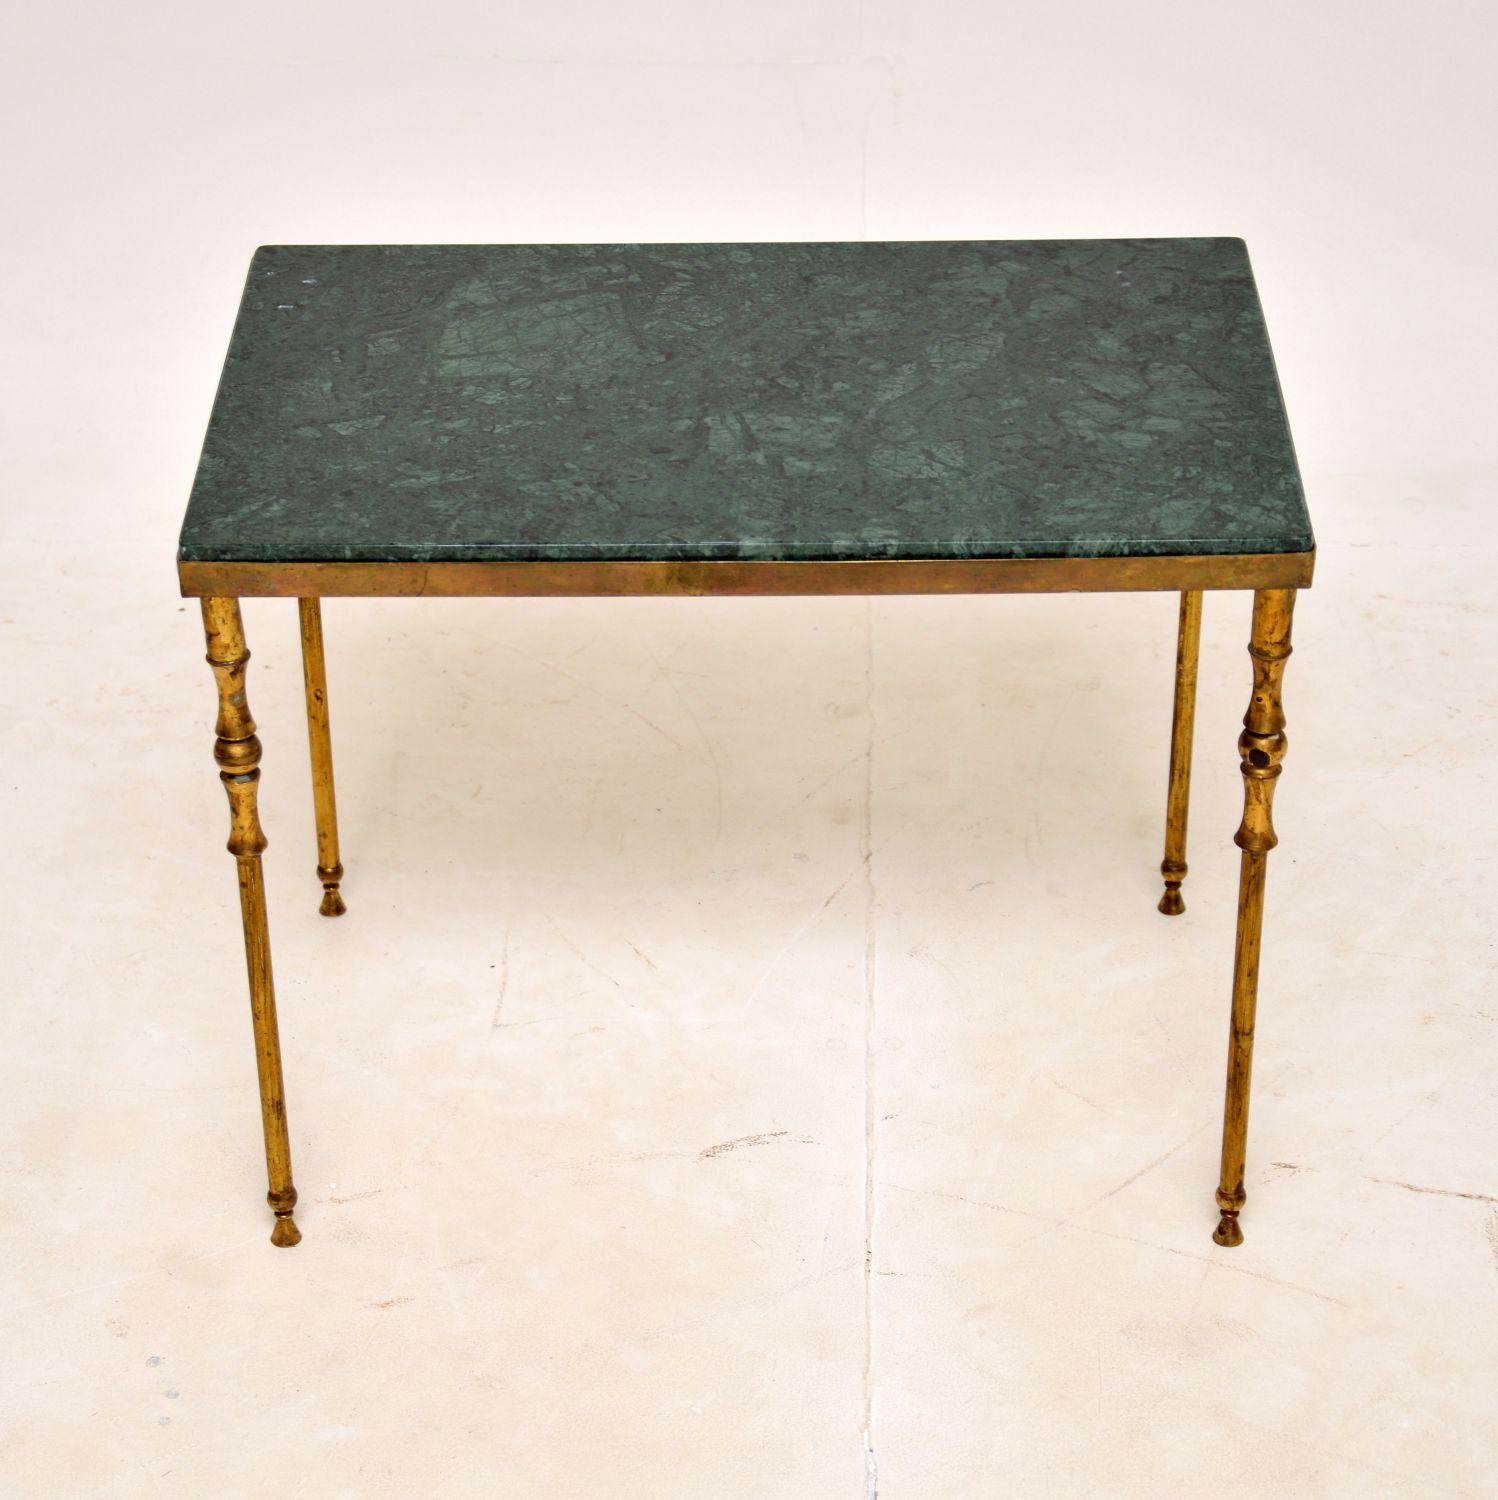 A very stylish and well made vintage side table in solid brass and marble. This was made in France, it dates from the 1950-60’s.

The frame has an elegant yet very strong design, the legs are beautifully turned. We have had the inset green marble